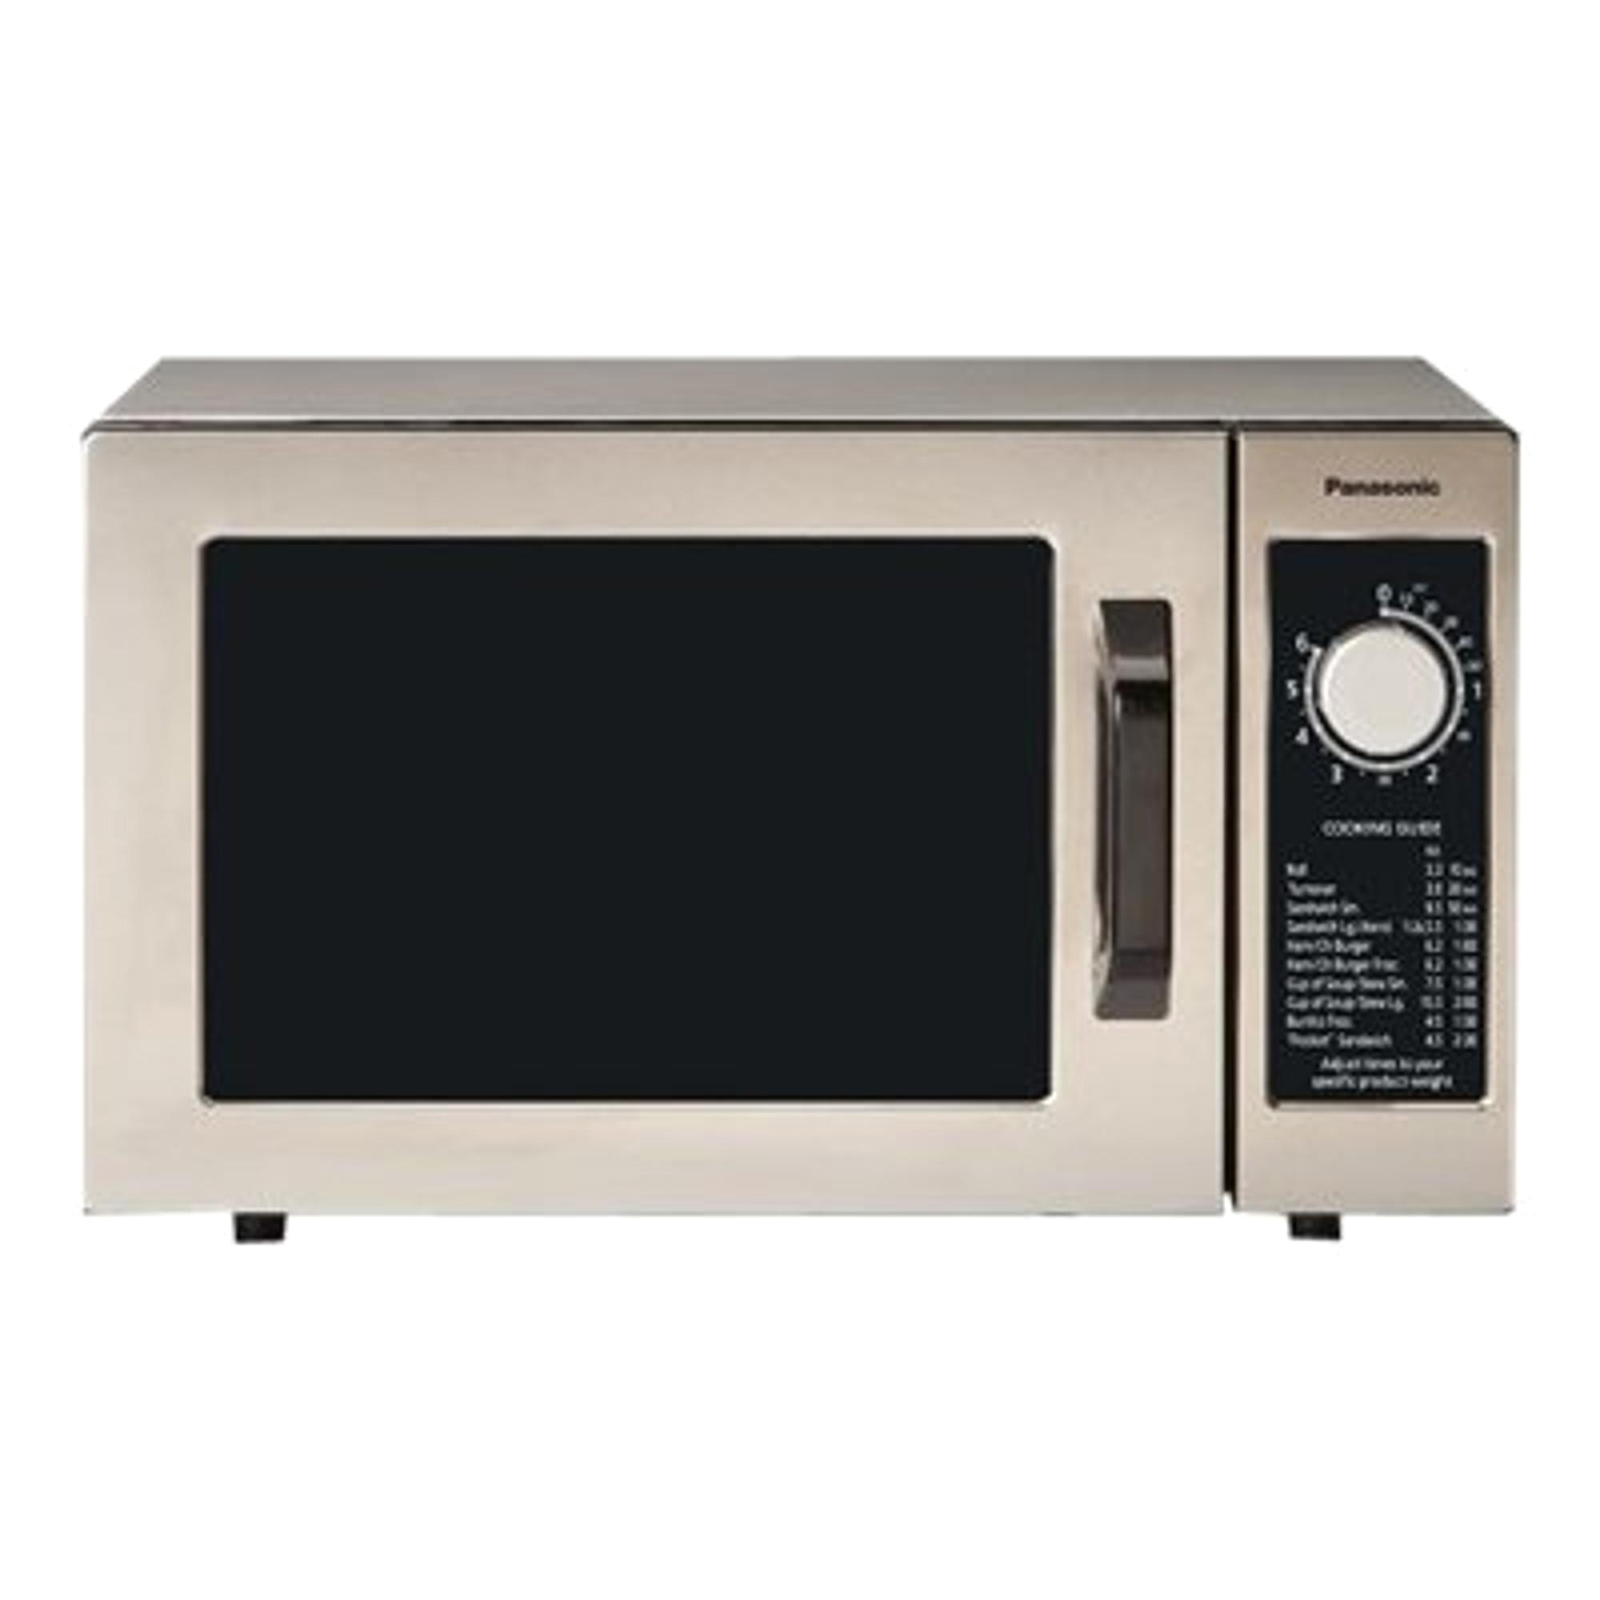 Panasonic NE-1025F  0.8cu.ft. Stainless Steel Commercial Microwave Oven with 6-Minute Timer